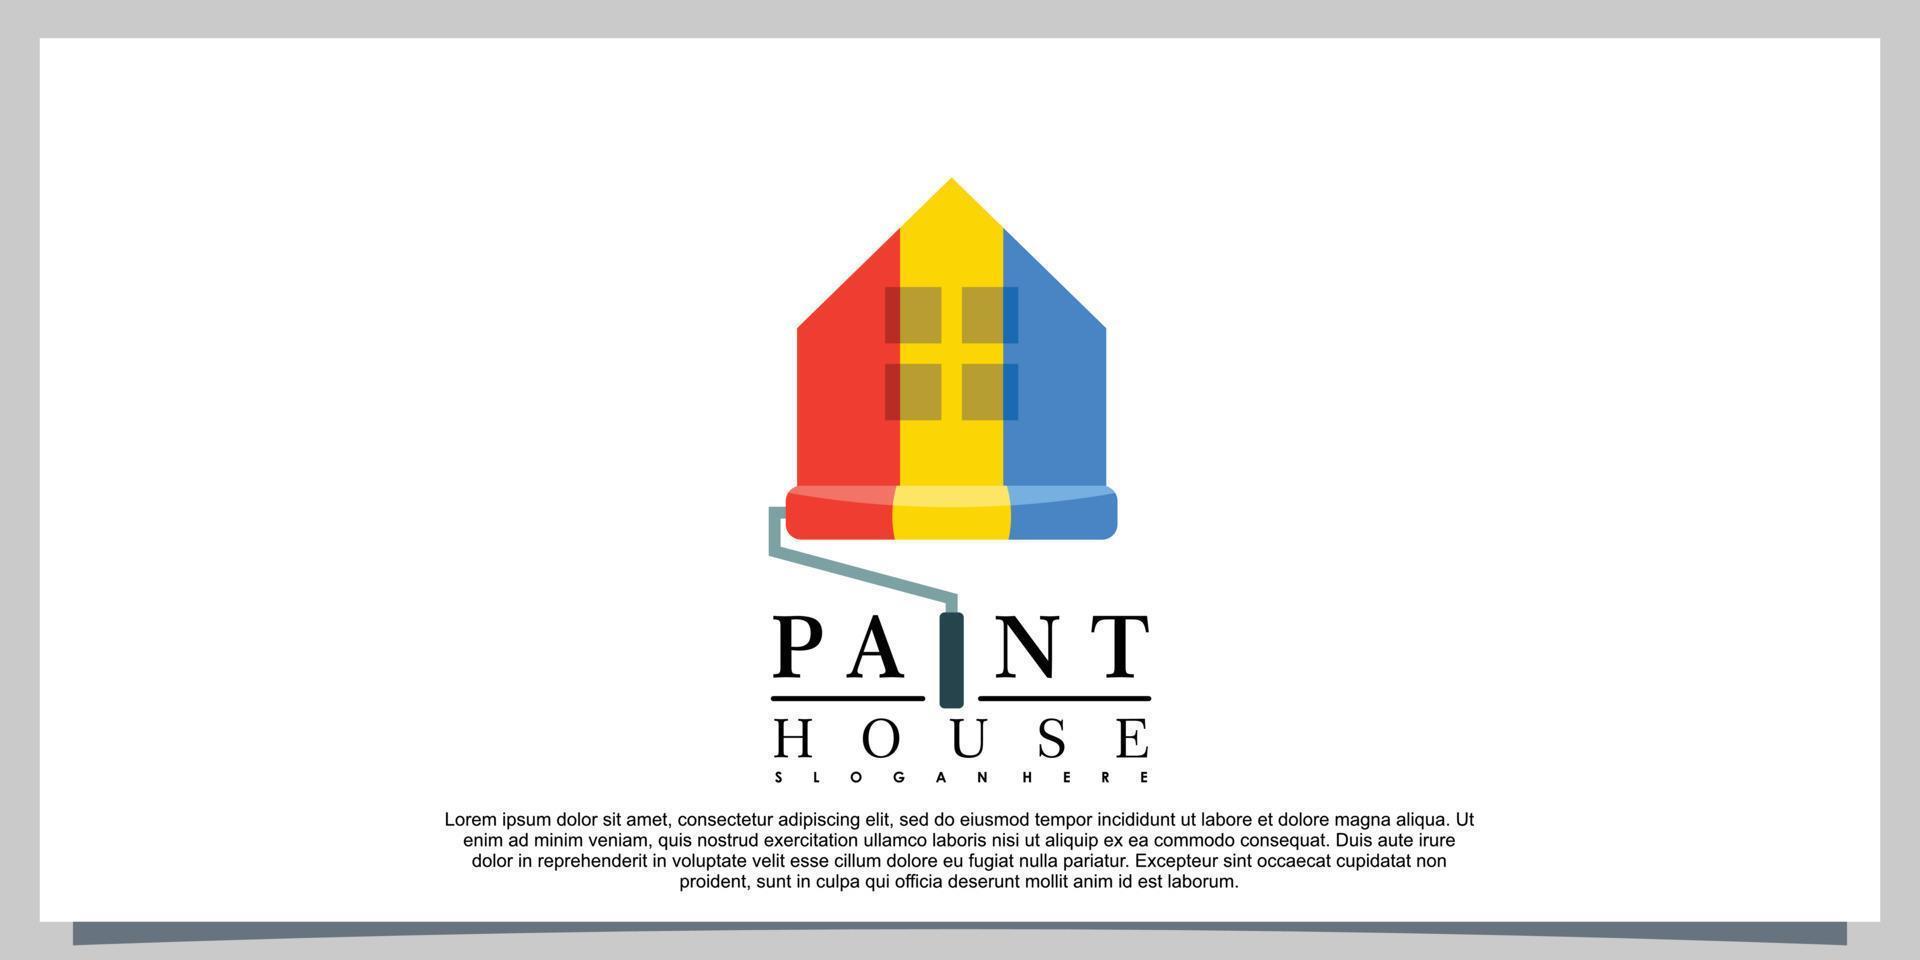 paint house logo design with template modern concept vector